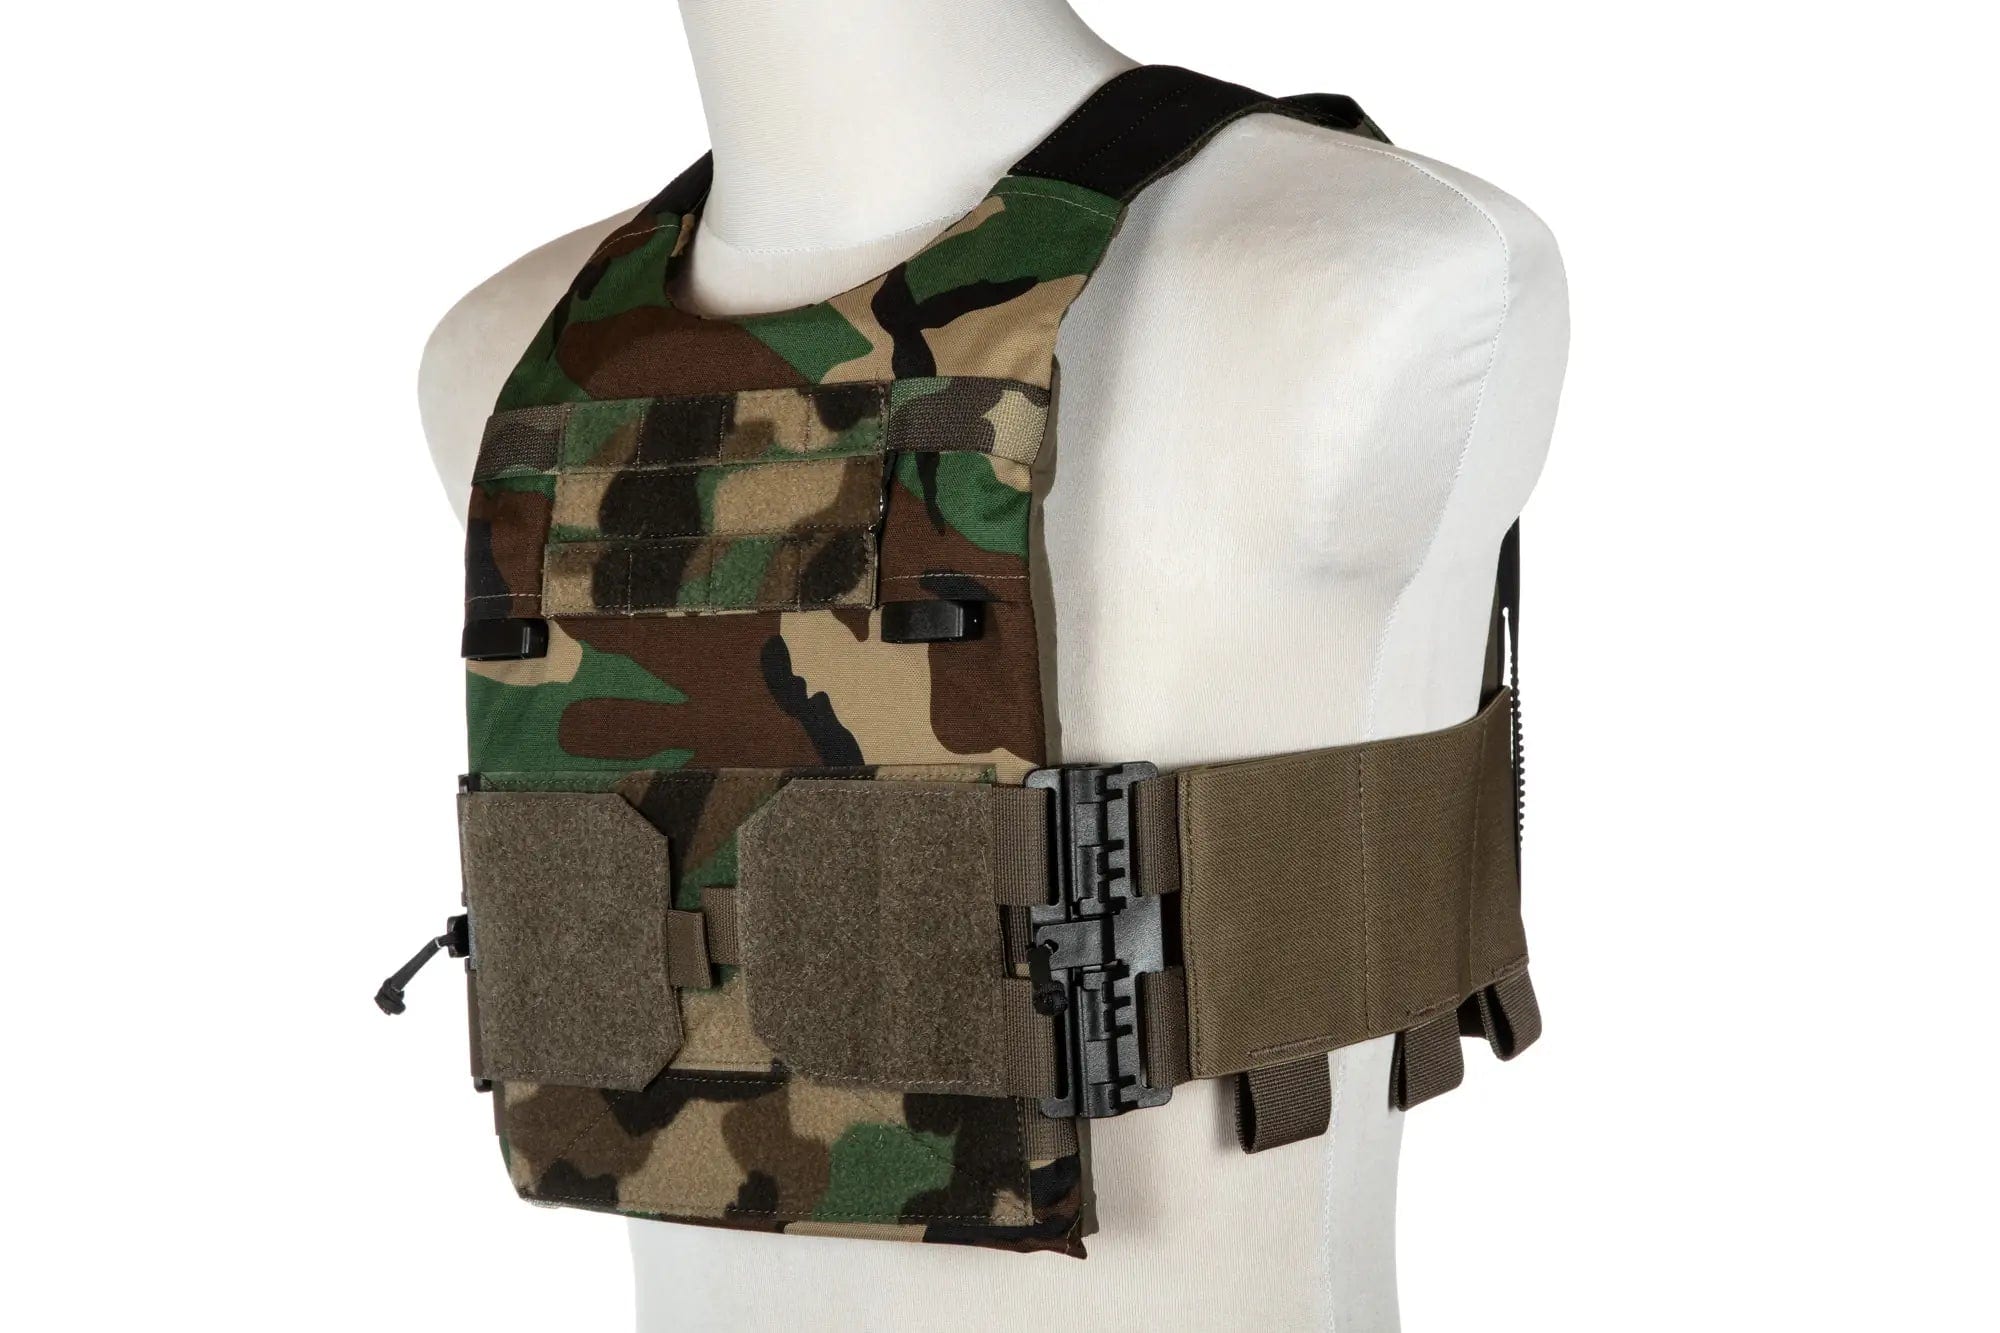 Review] Spiritus Systems LV-119 Plate Carrier - Pew Pew Tactical